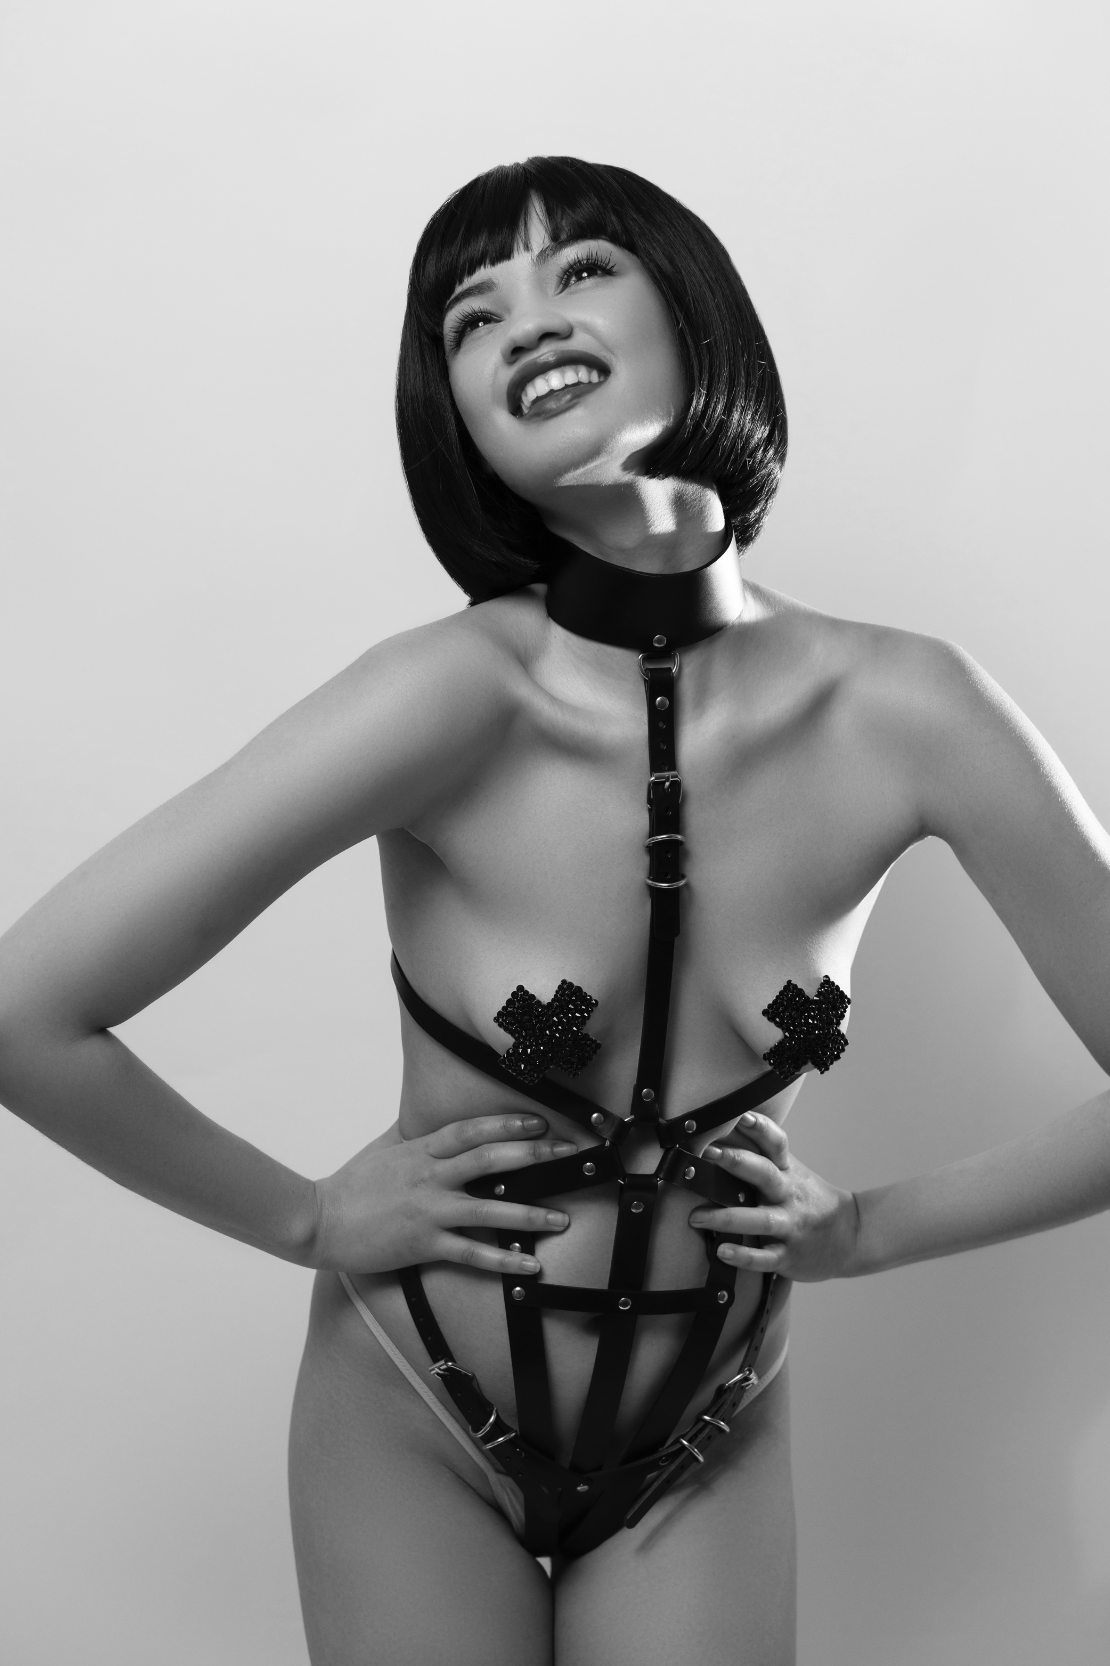 luxury italian leather fashion and fetish body harness, bespoke, made-to-order in nyc, model view